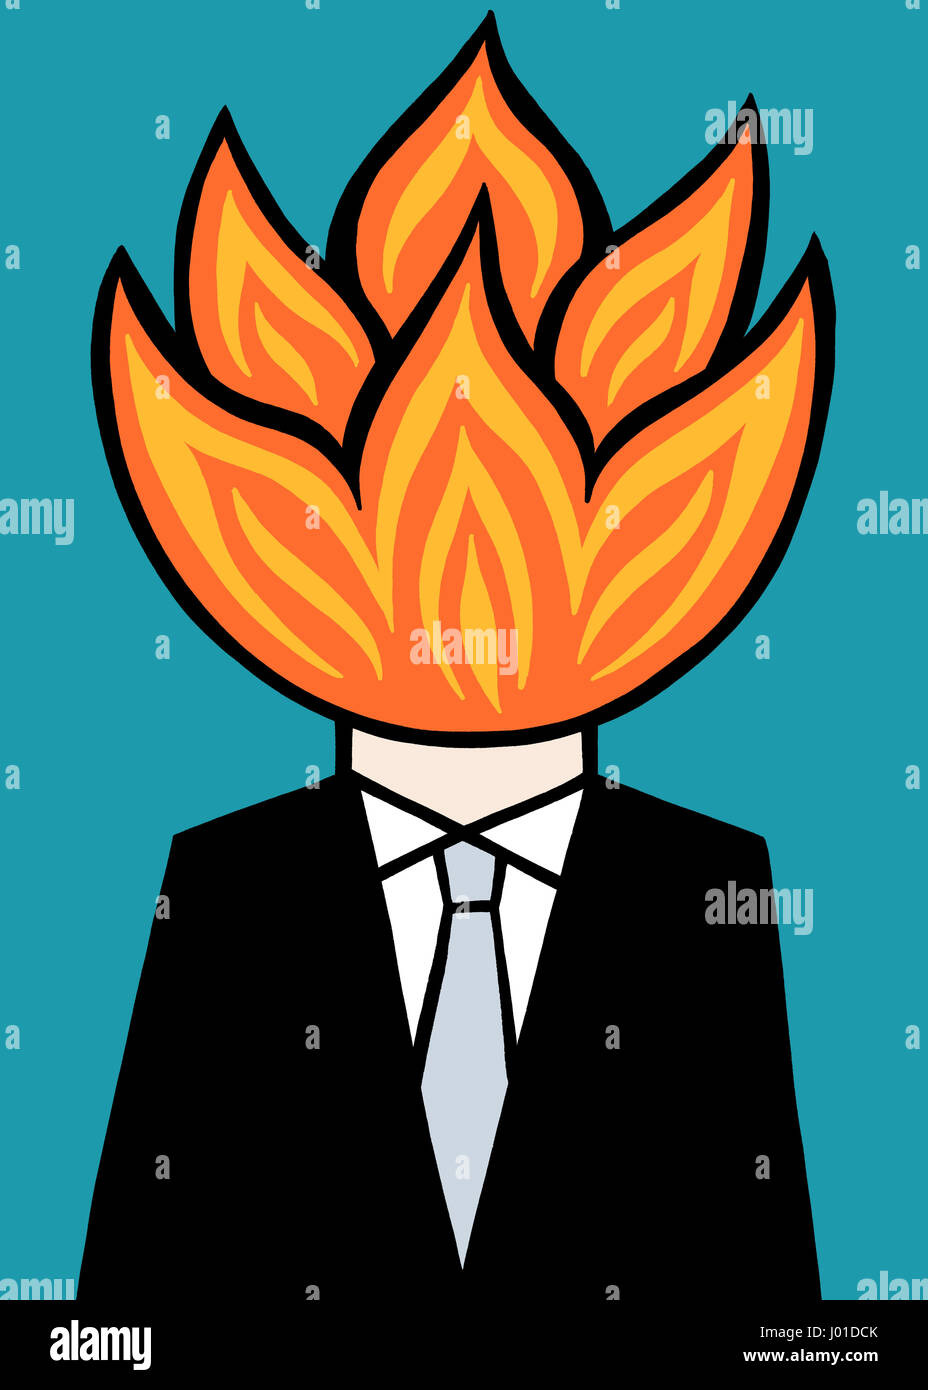 On fire. A business illustration about thinking different thoughts. Stock Photo